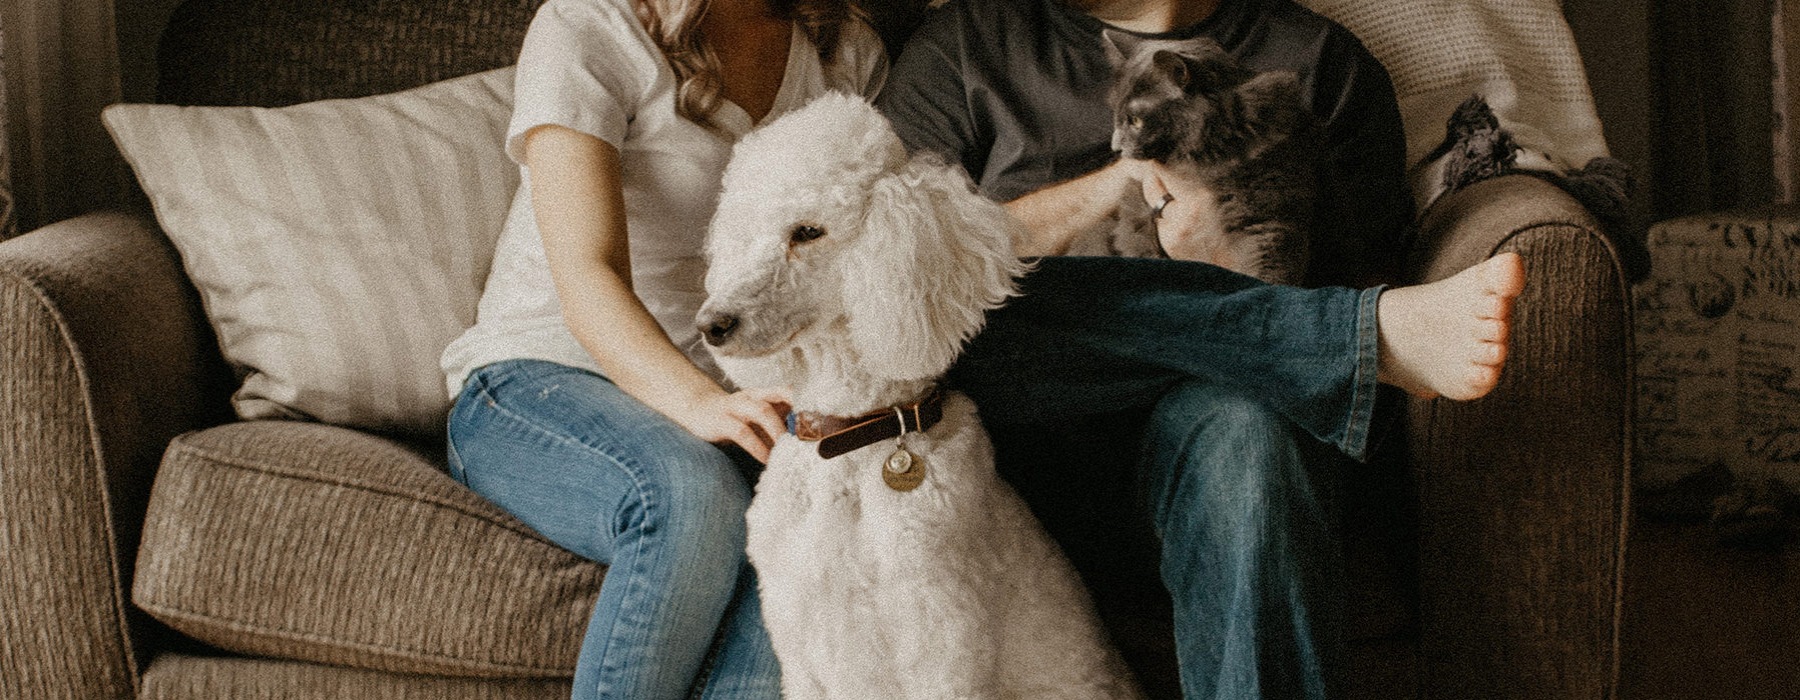 Woman and man sitting on a couch with a gray cat and a white poodle